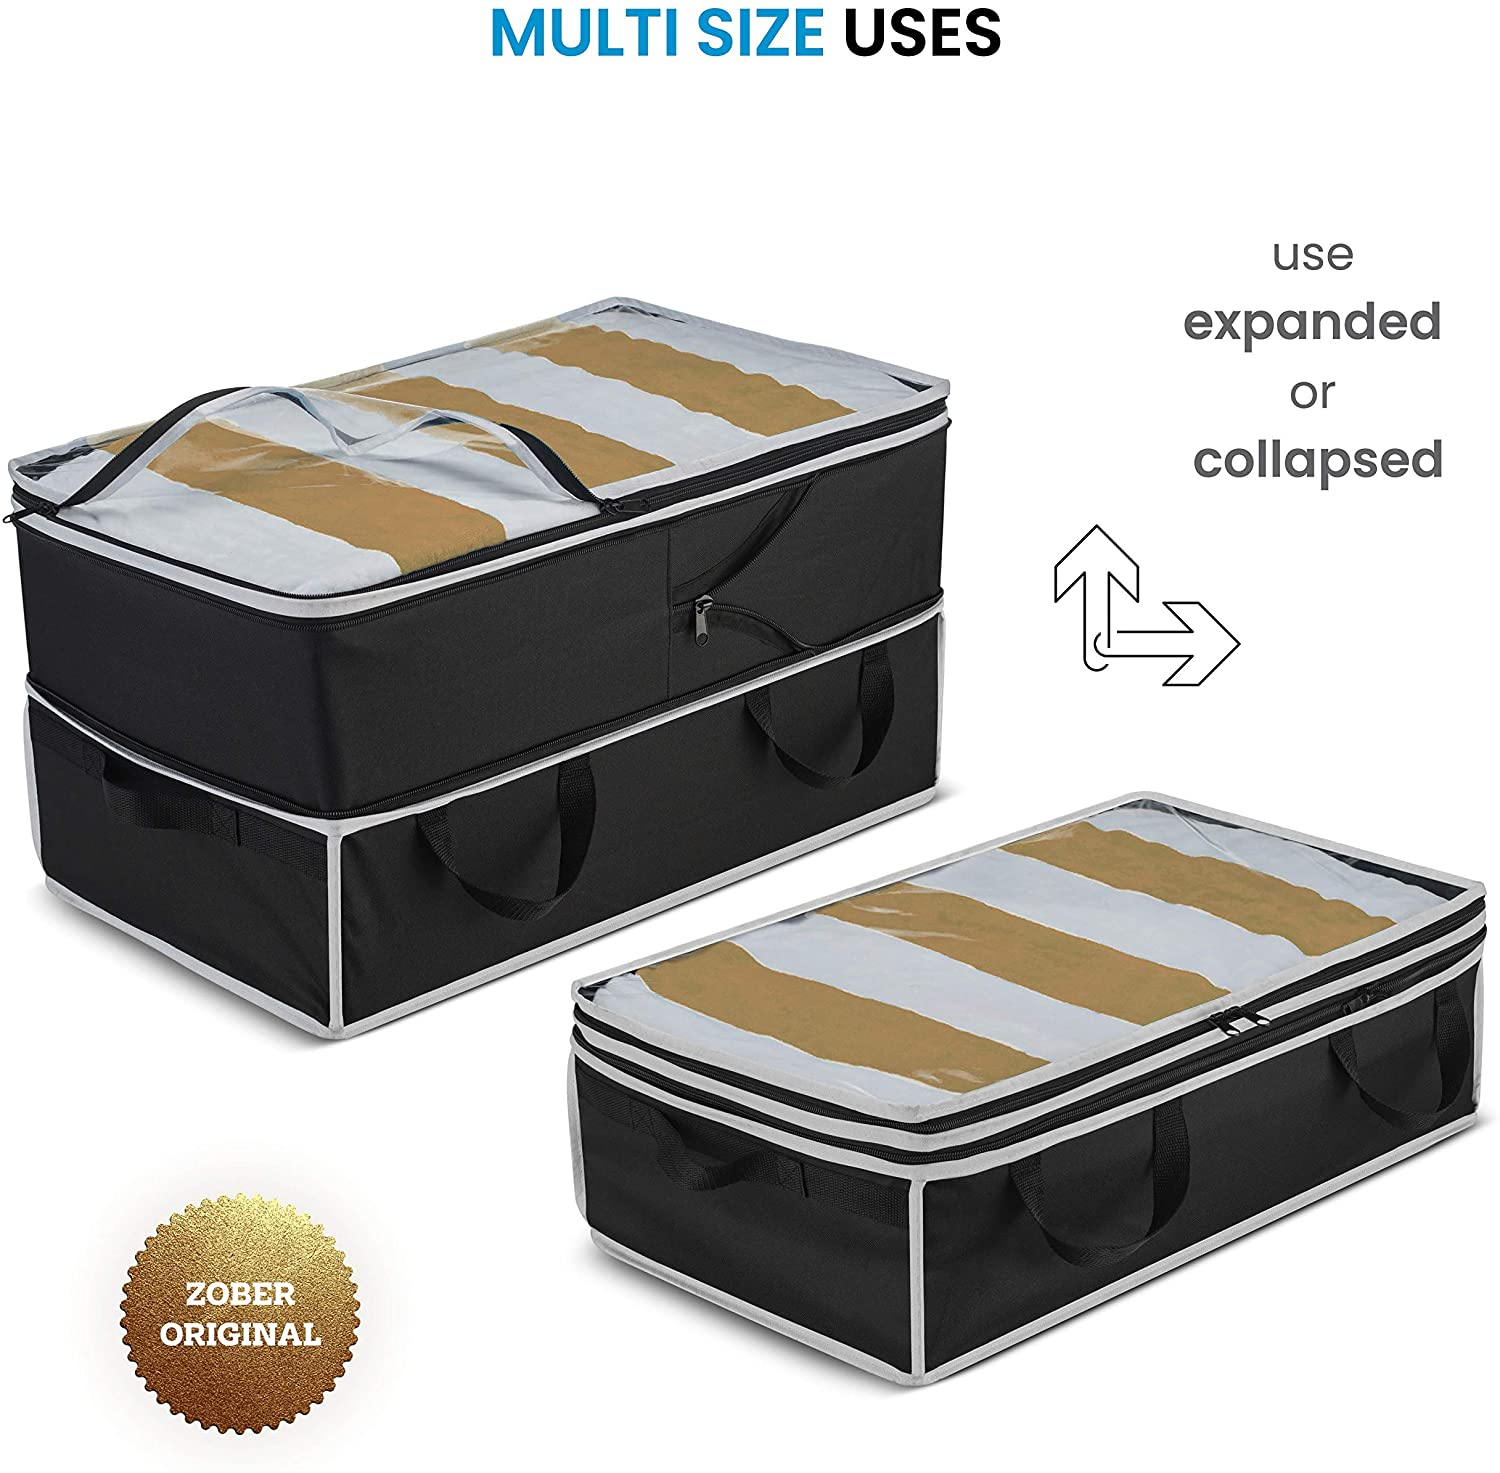 Expandable Clothes Storage Bags [70L Capacity] 1 Pk - 2 Adjustable Sizes for Compact under Bed Storage or Expands to Large Clothing Storage Bag, Reinforced Carry Handles- for Comforter Blanket Bedding